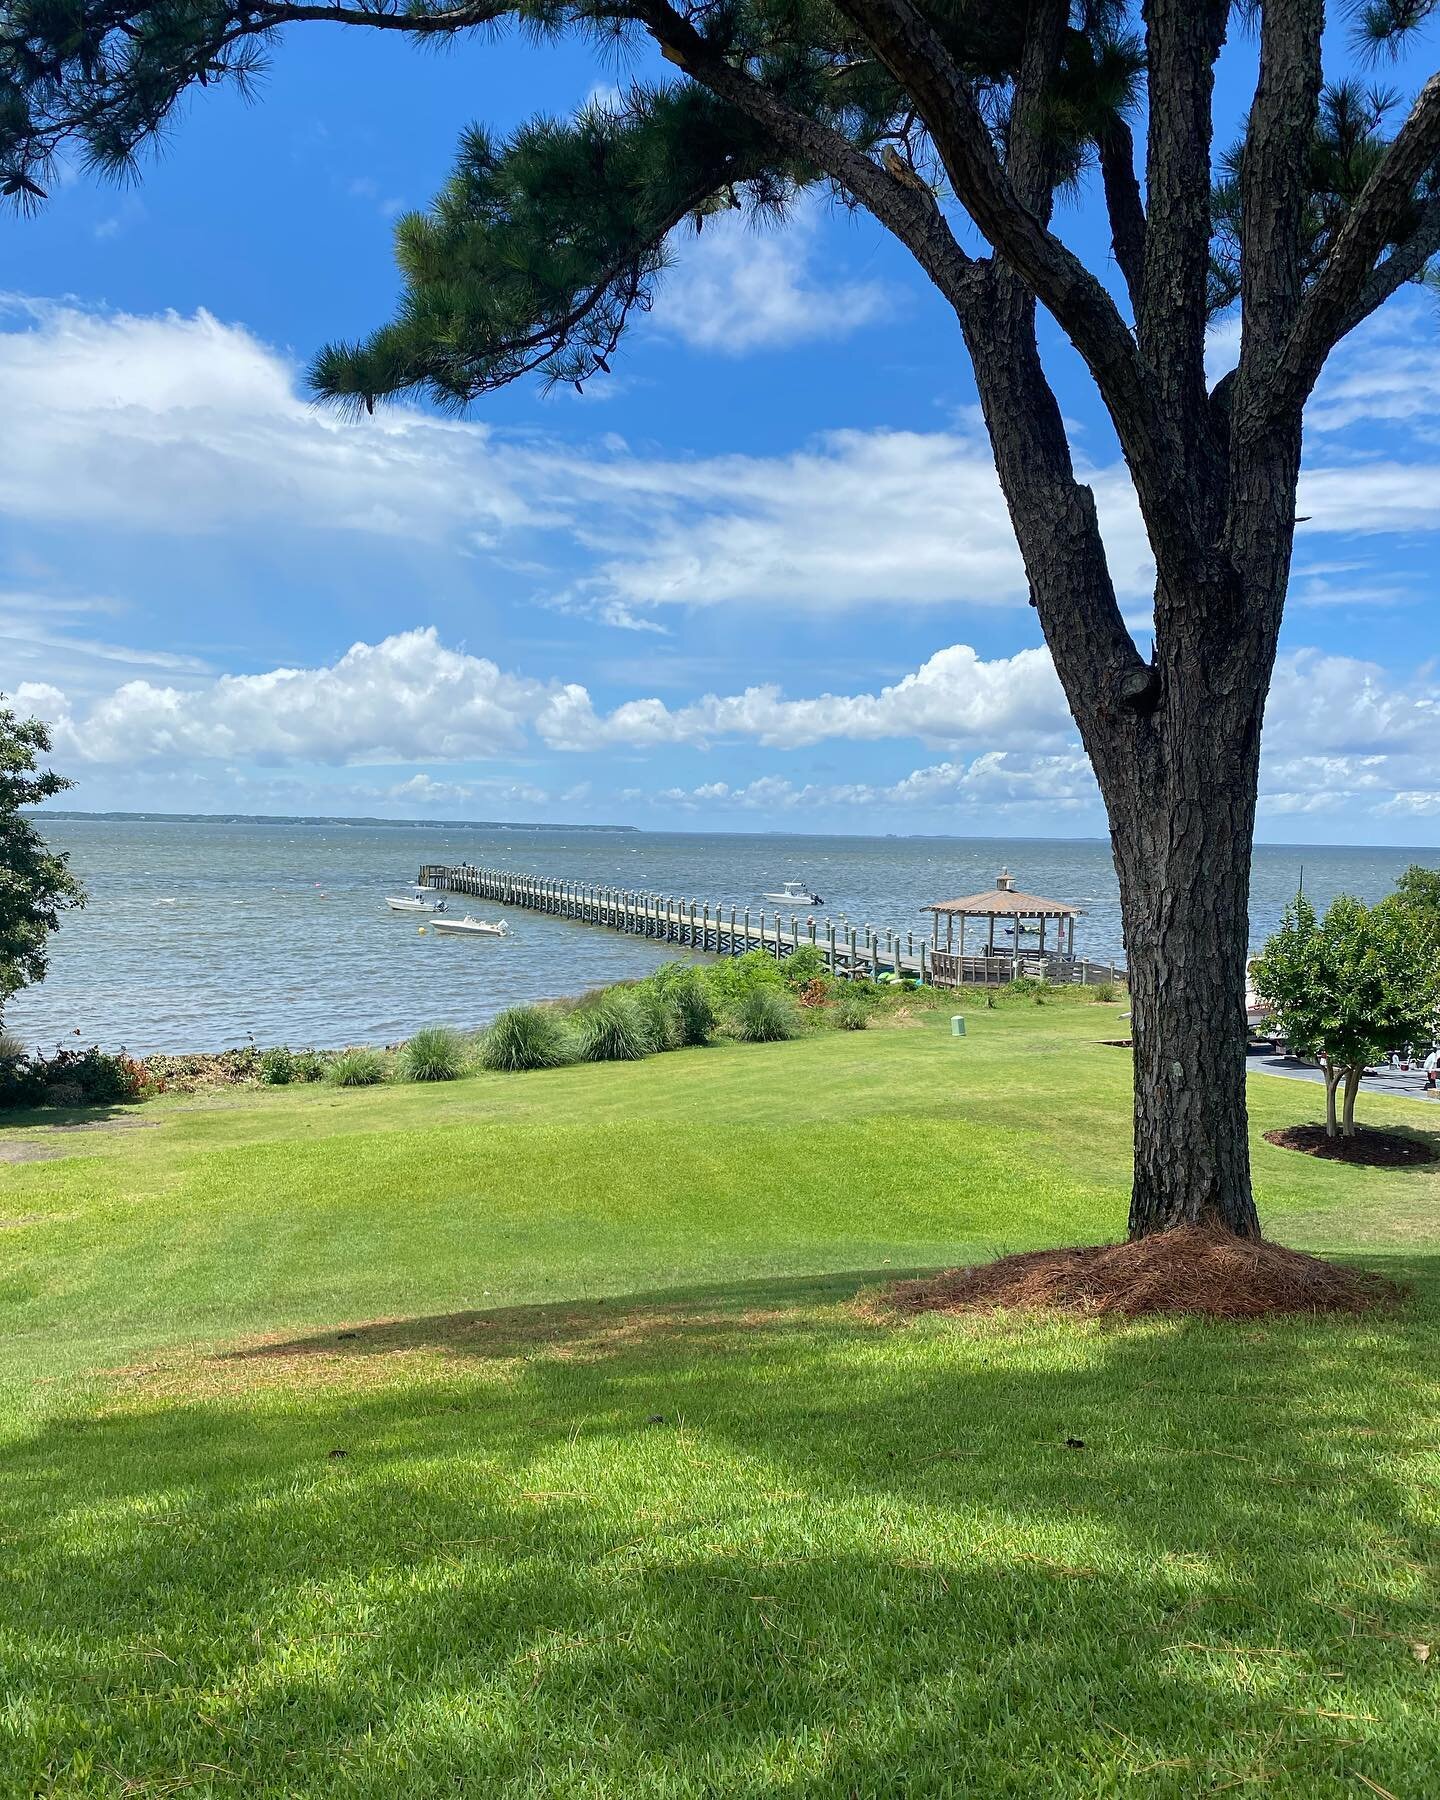 You just can&rsquo;t beat a backyard view like this. 🌅😍🙌🏼 This property is for sale! Message me for details. 📲
.
.
.
.
.
.
#outerbanksrealtygroup #mandysellsobx #obxhomesales #obxrealtor #outerbanksrealtor #visitnc #obxstuff #northcarolina #beac